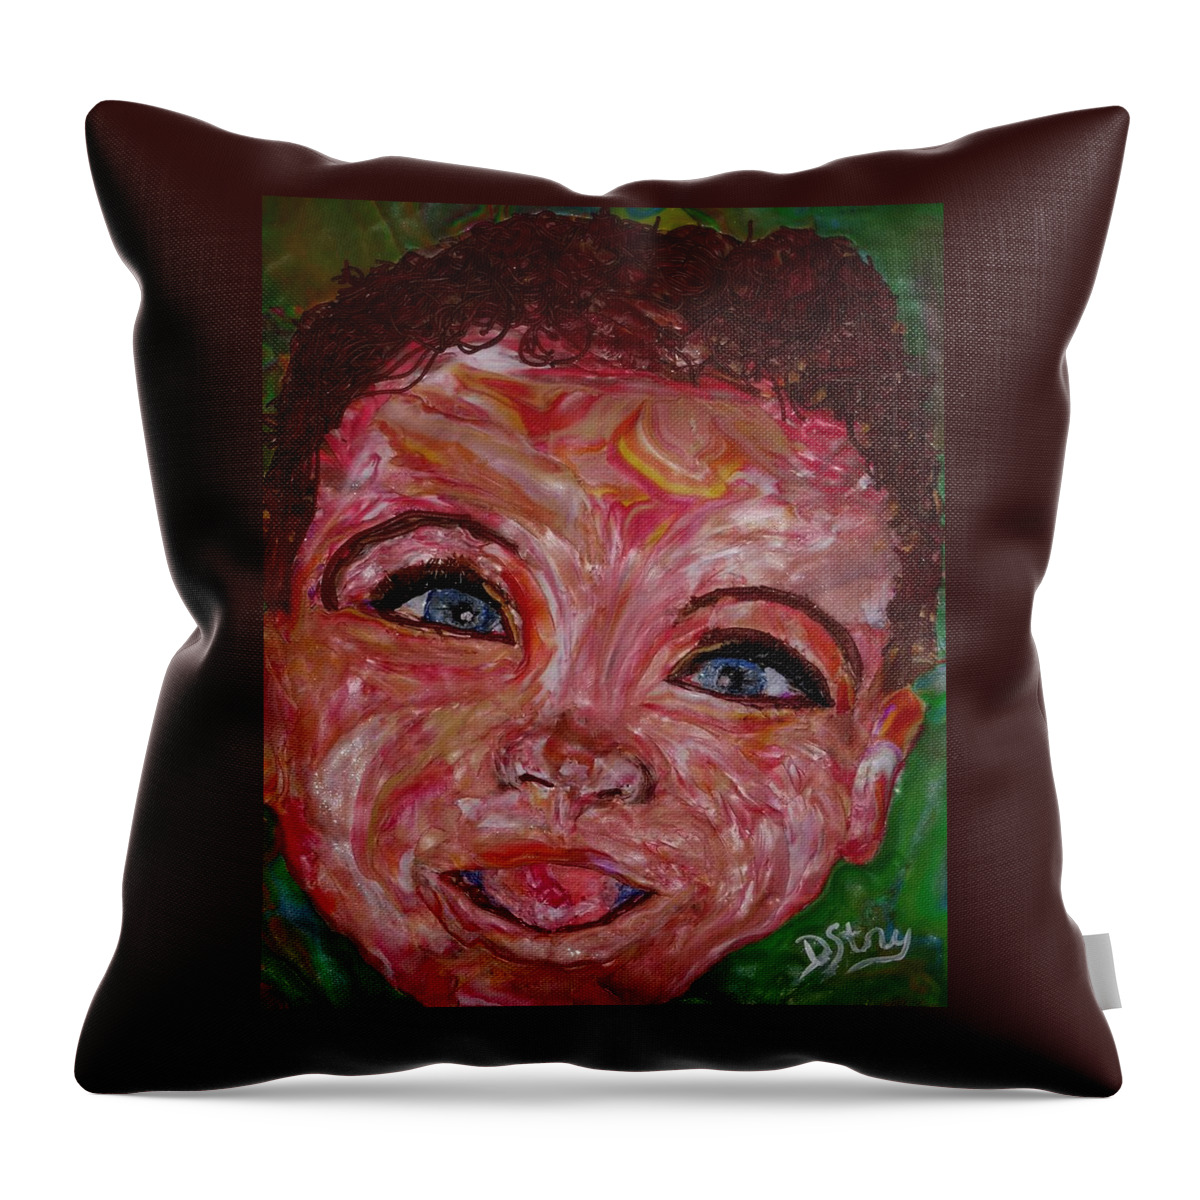 Polymer Clay Throw Pillow featuring the mixed media Azuriah by Deborah Stanley